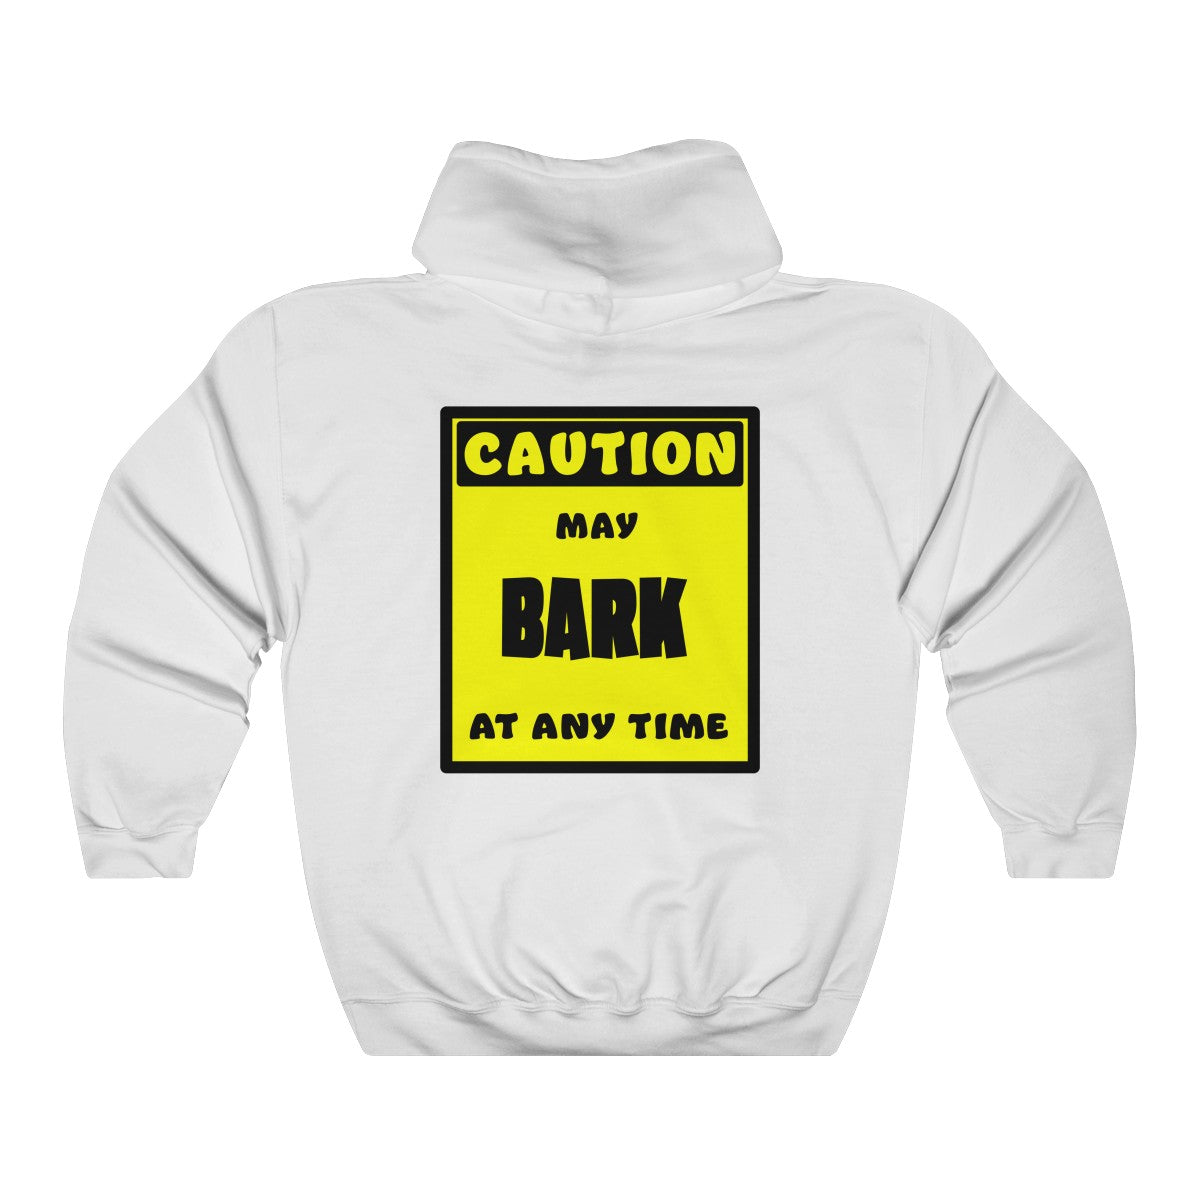 CAUTION! May BARK at any time! - Hoodie Hoodie AFLT-Whootorca White S 